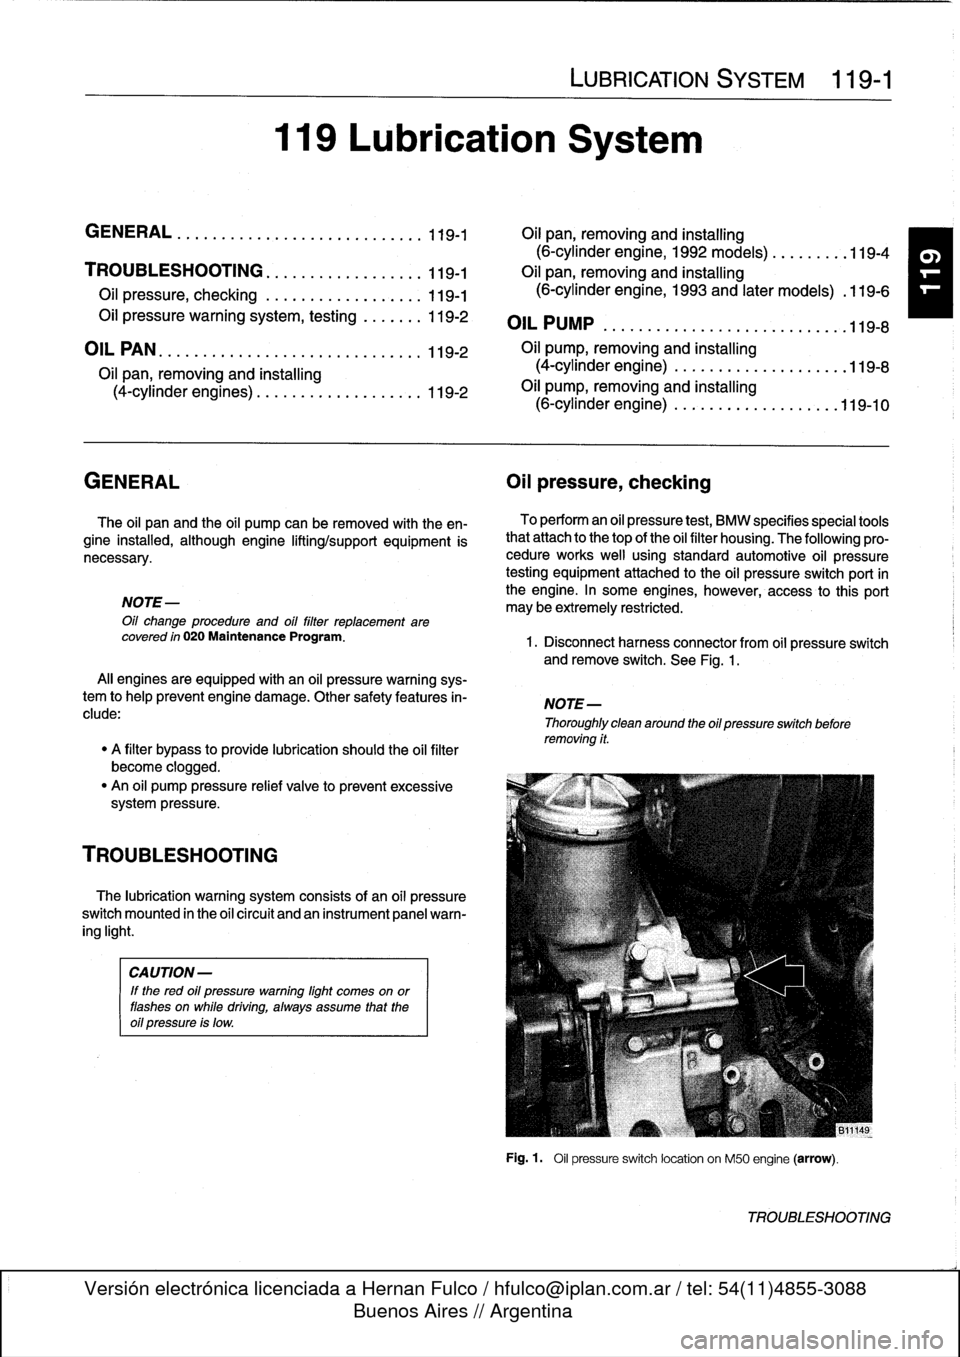 BMW 323i 1993 E36 Service Manual 
119
Lubrication
System

LUBRICATION
SYSTEM

	

119-1

GENERAL
.
.
.
.
.
.
...
.
.
.
.
.
.
.
...,
,
...
.
.
.
.
119-1

	

OH
pan,
removing
and
installing

(6-cylinder
engine,
1992
models)
.
.
.
.
.
.
